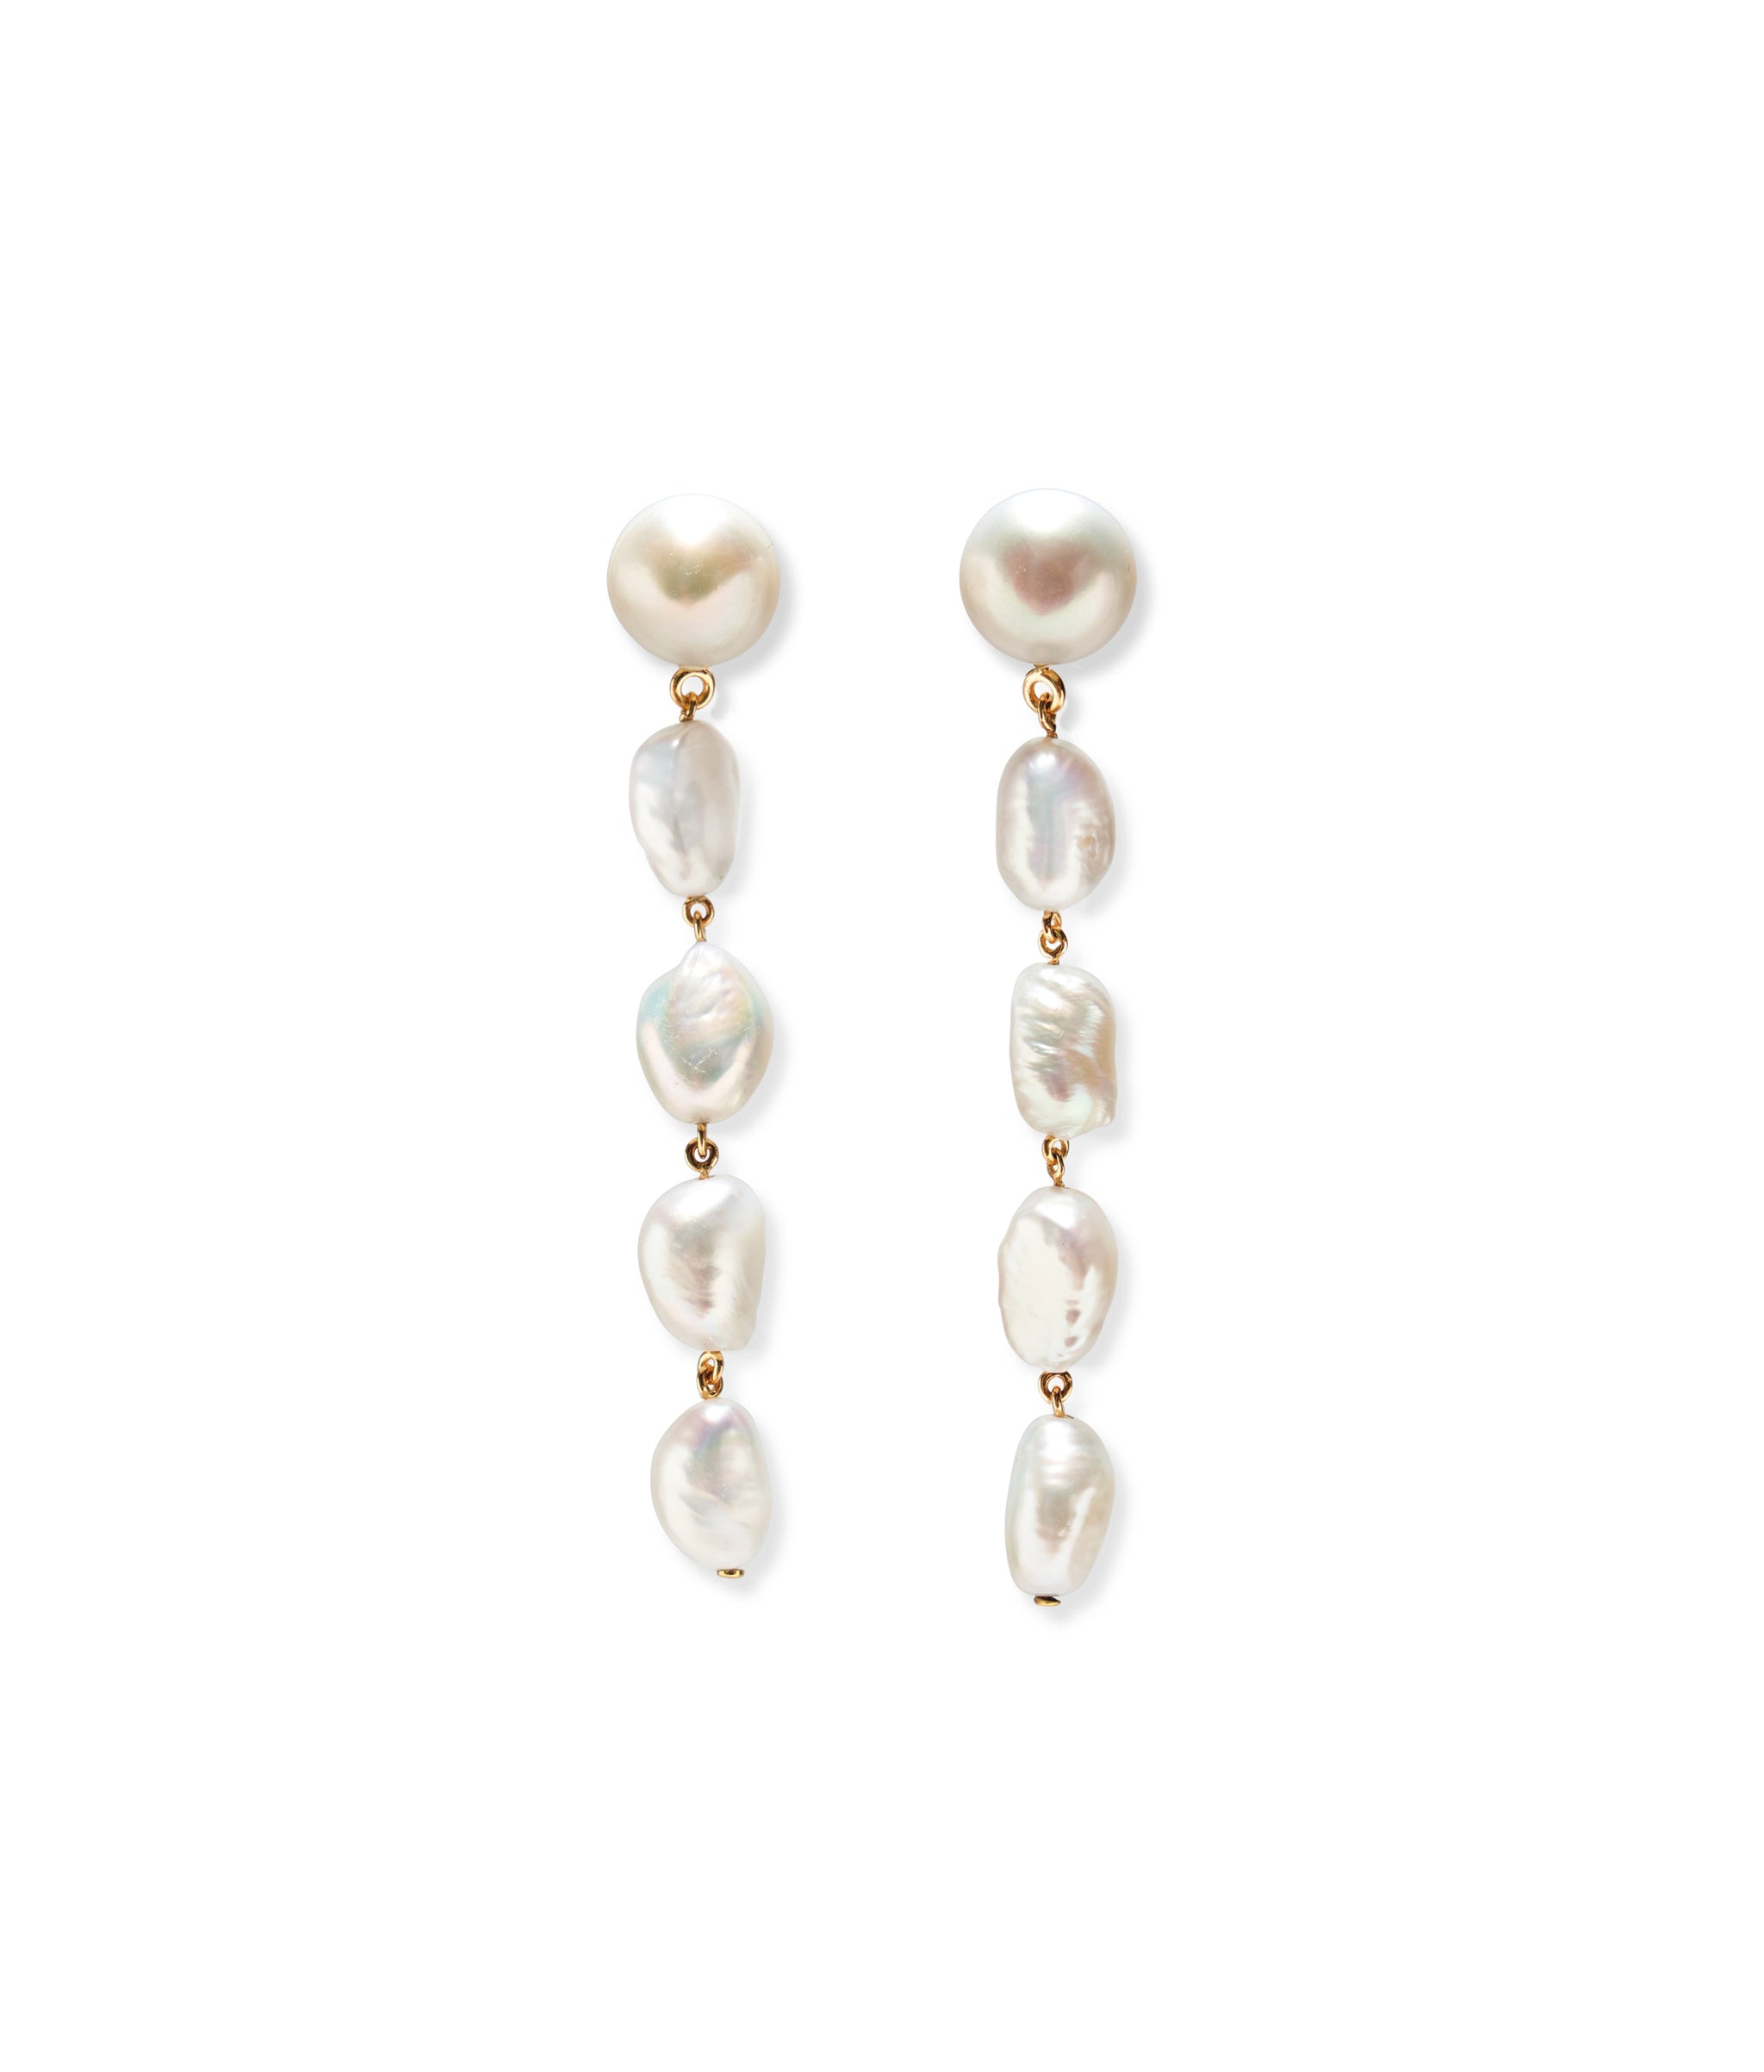 Cairo Earrings. Columns of freshwater pearls linked with loops of gold-plated brass.